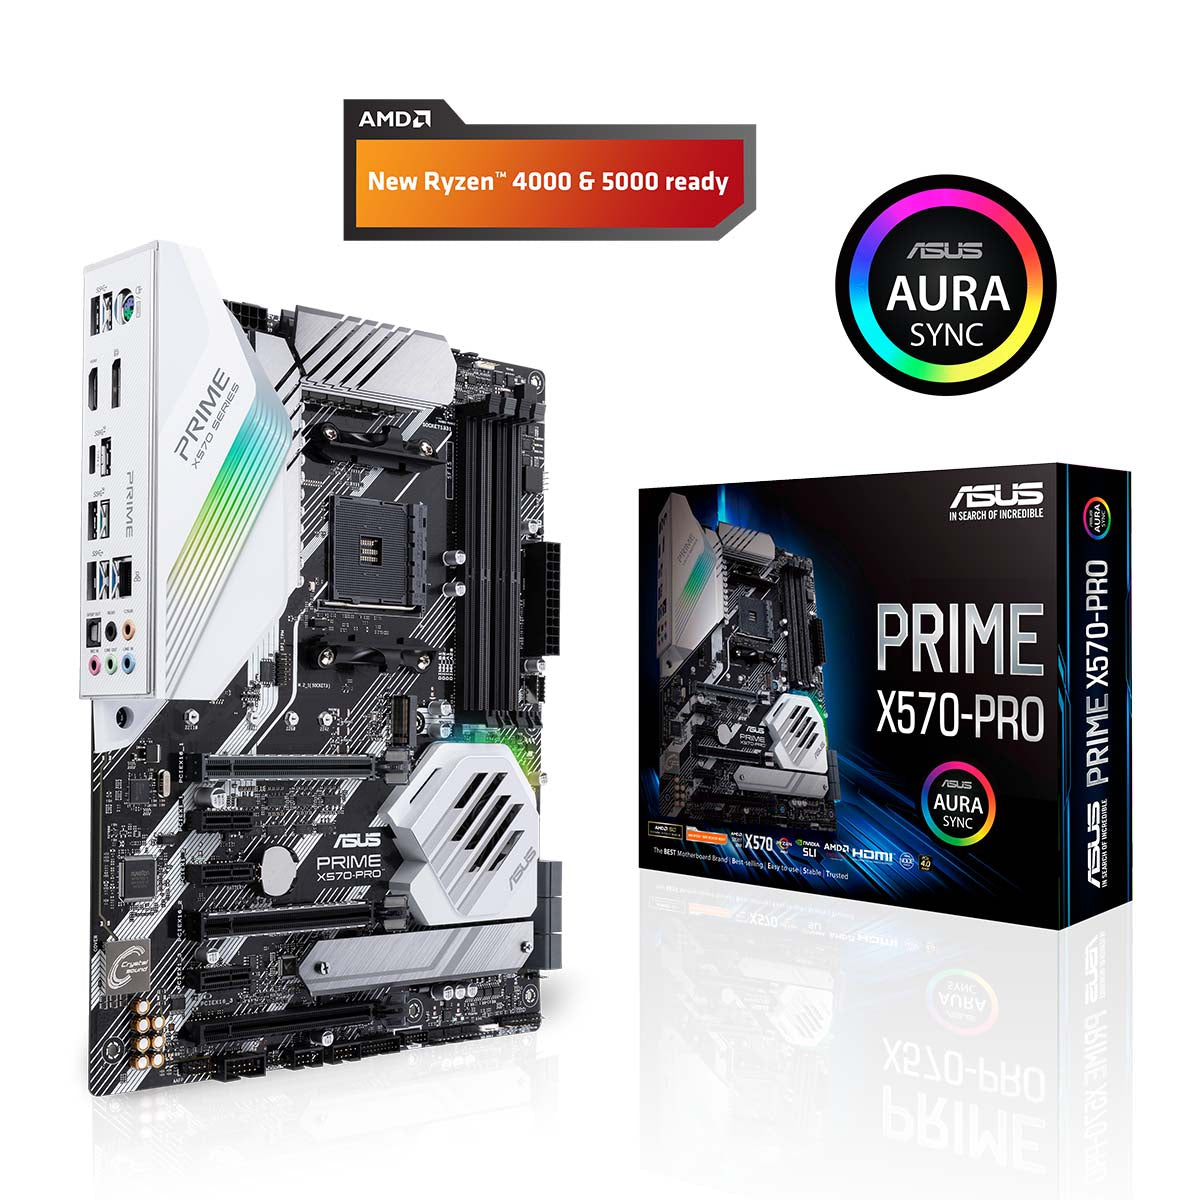 ASUS Prime X570-PRO CSM AMD AM4 ATX Motherboard with PCIe 4.0 Dual M.2 and Aura Sync